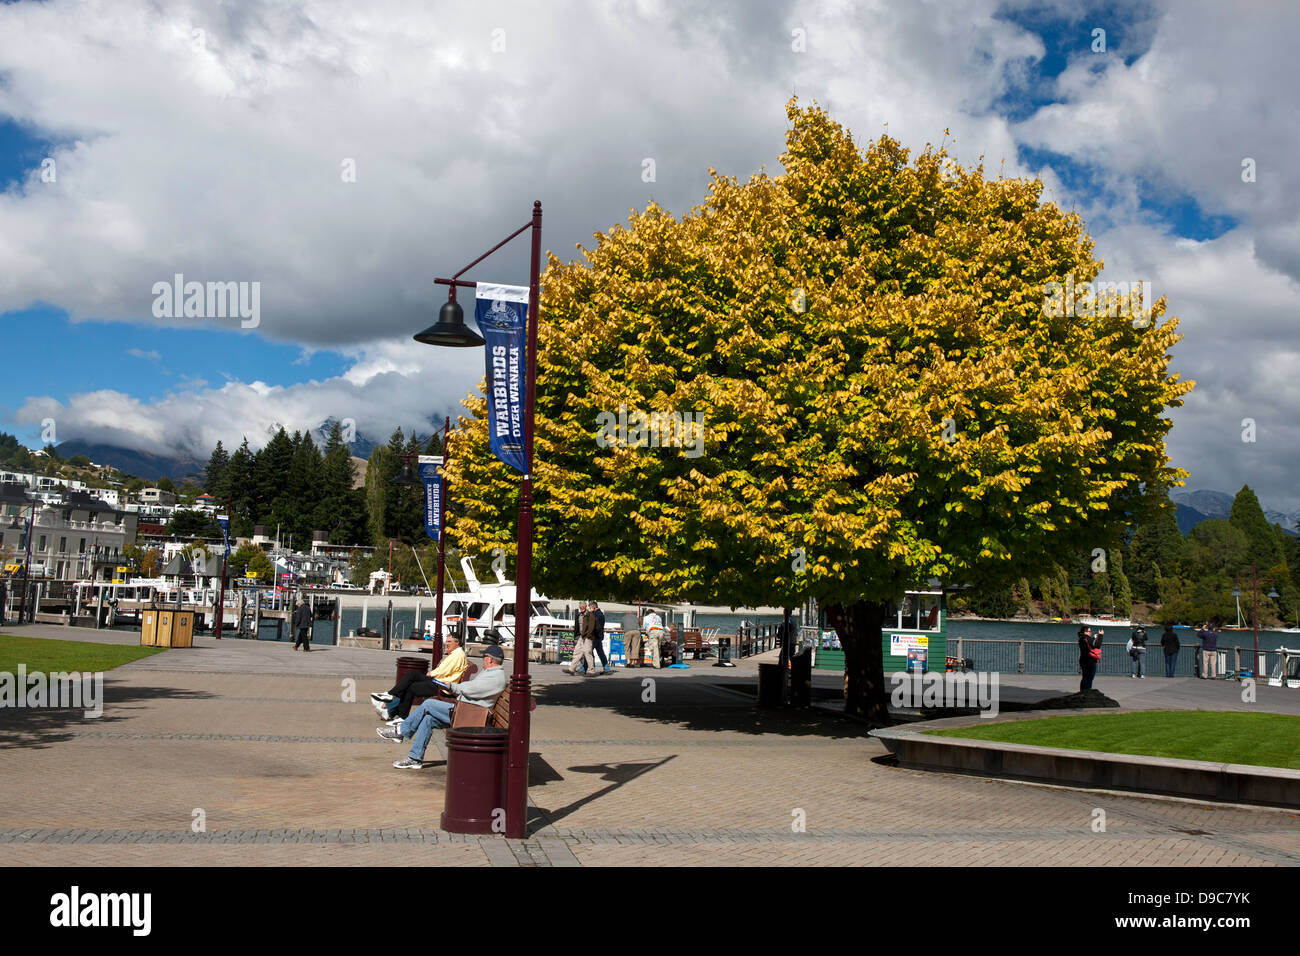 People sitting on benches in front of a yellow tree near the shore of Lake Wakatipu, Queenstown, Otago District, South Island, New Zealand Stock Photo